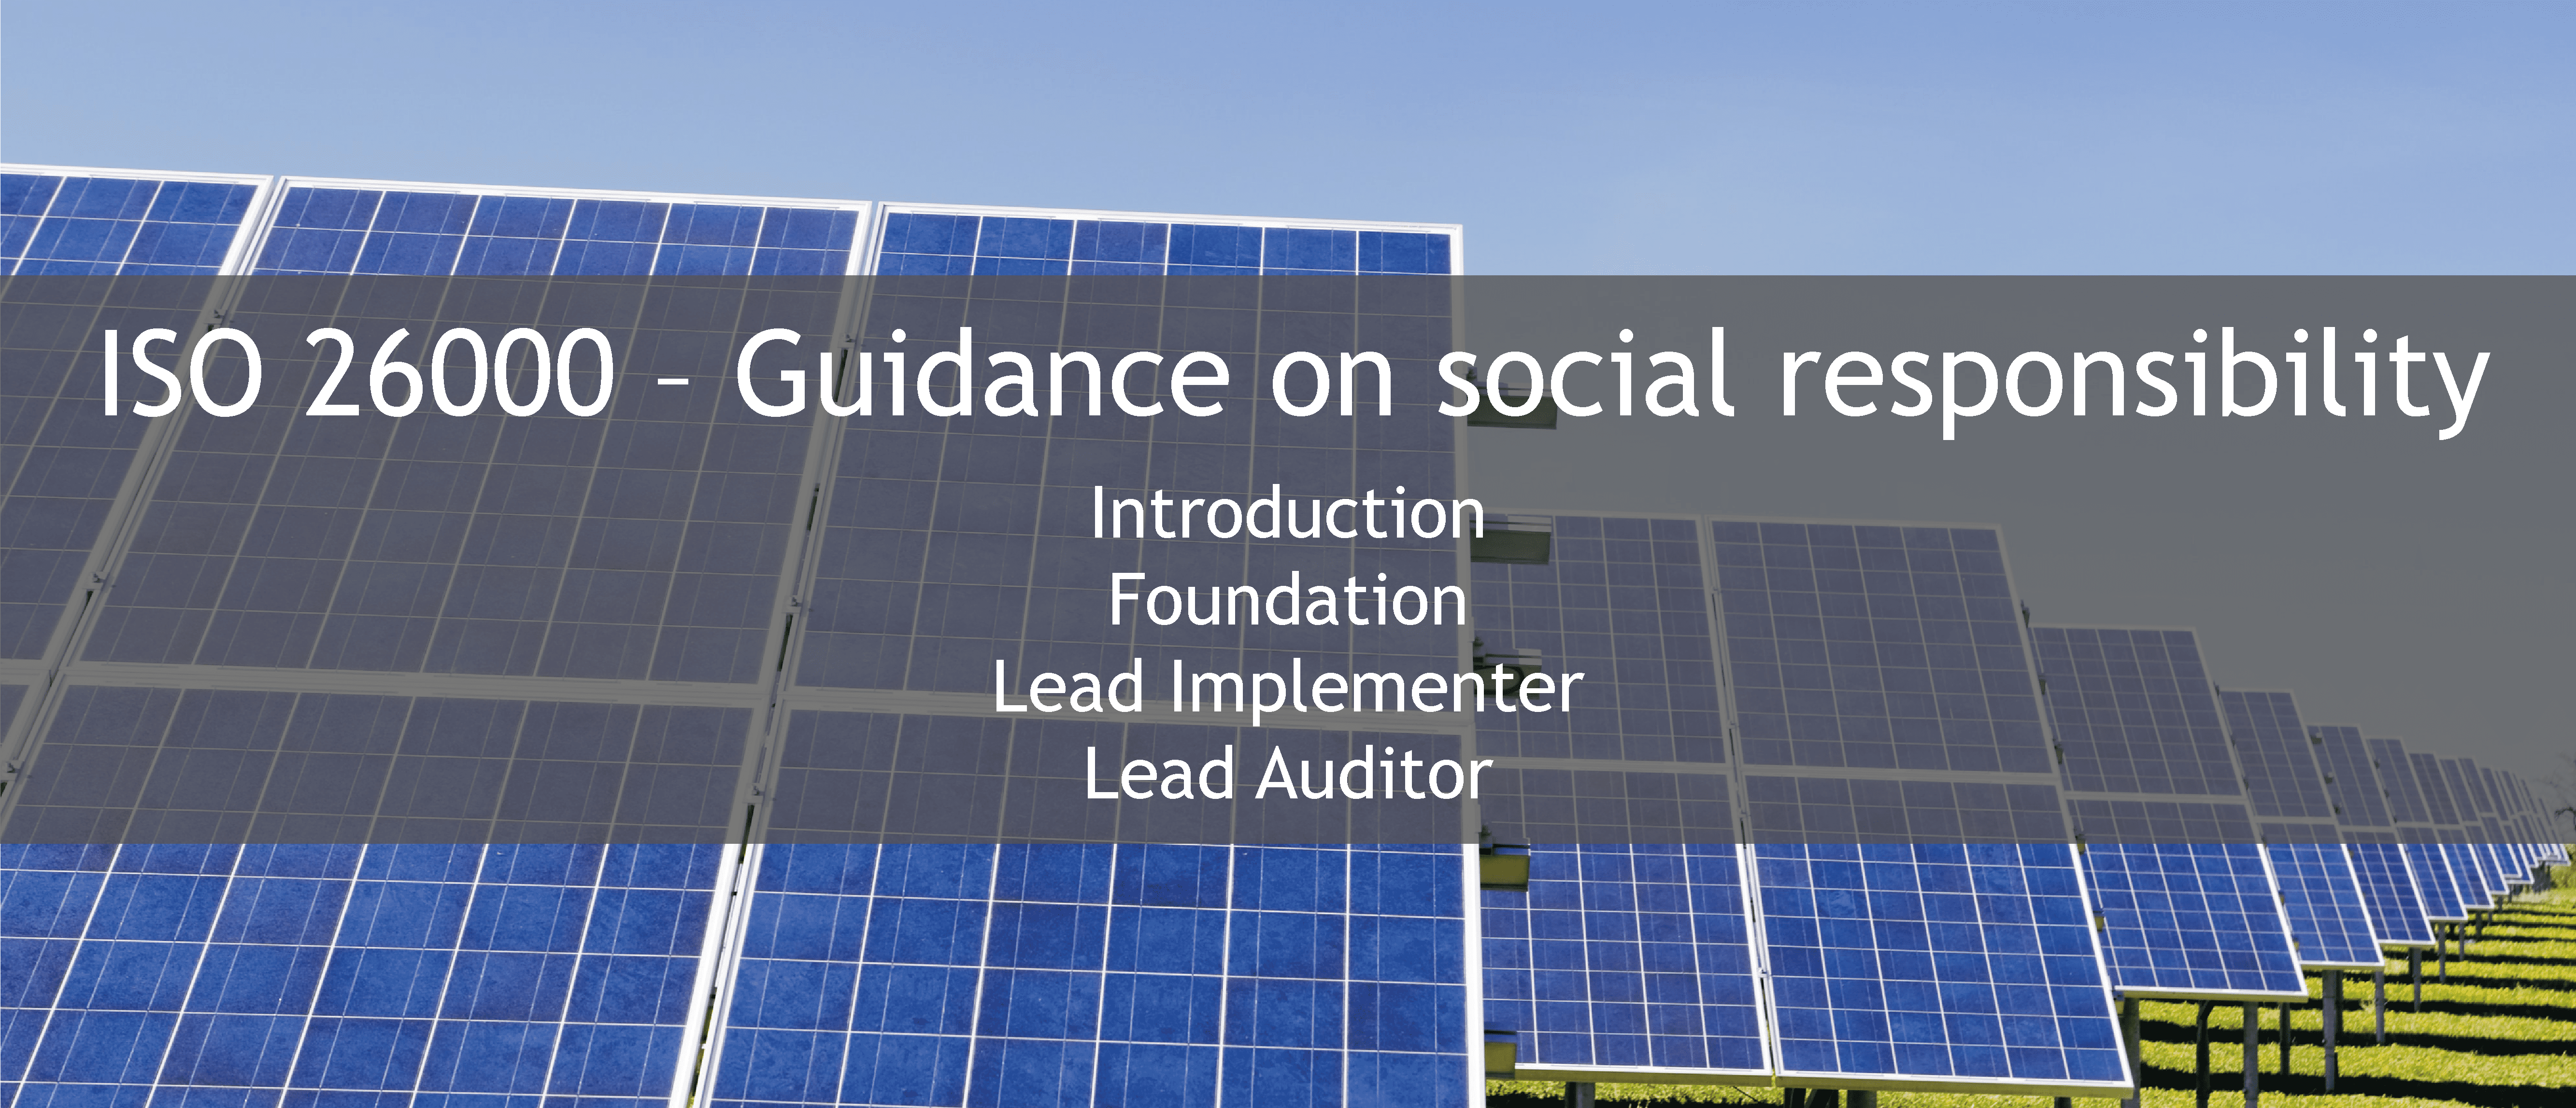 ISO 26000 training offer 1 - ISO 26000 Guidance on social responsibility